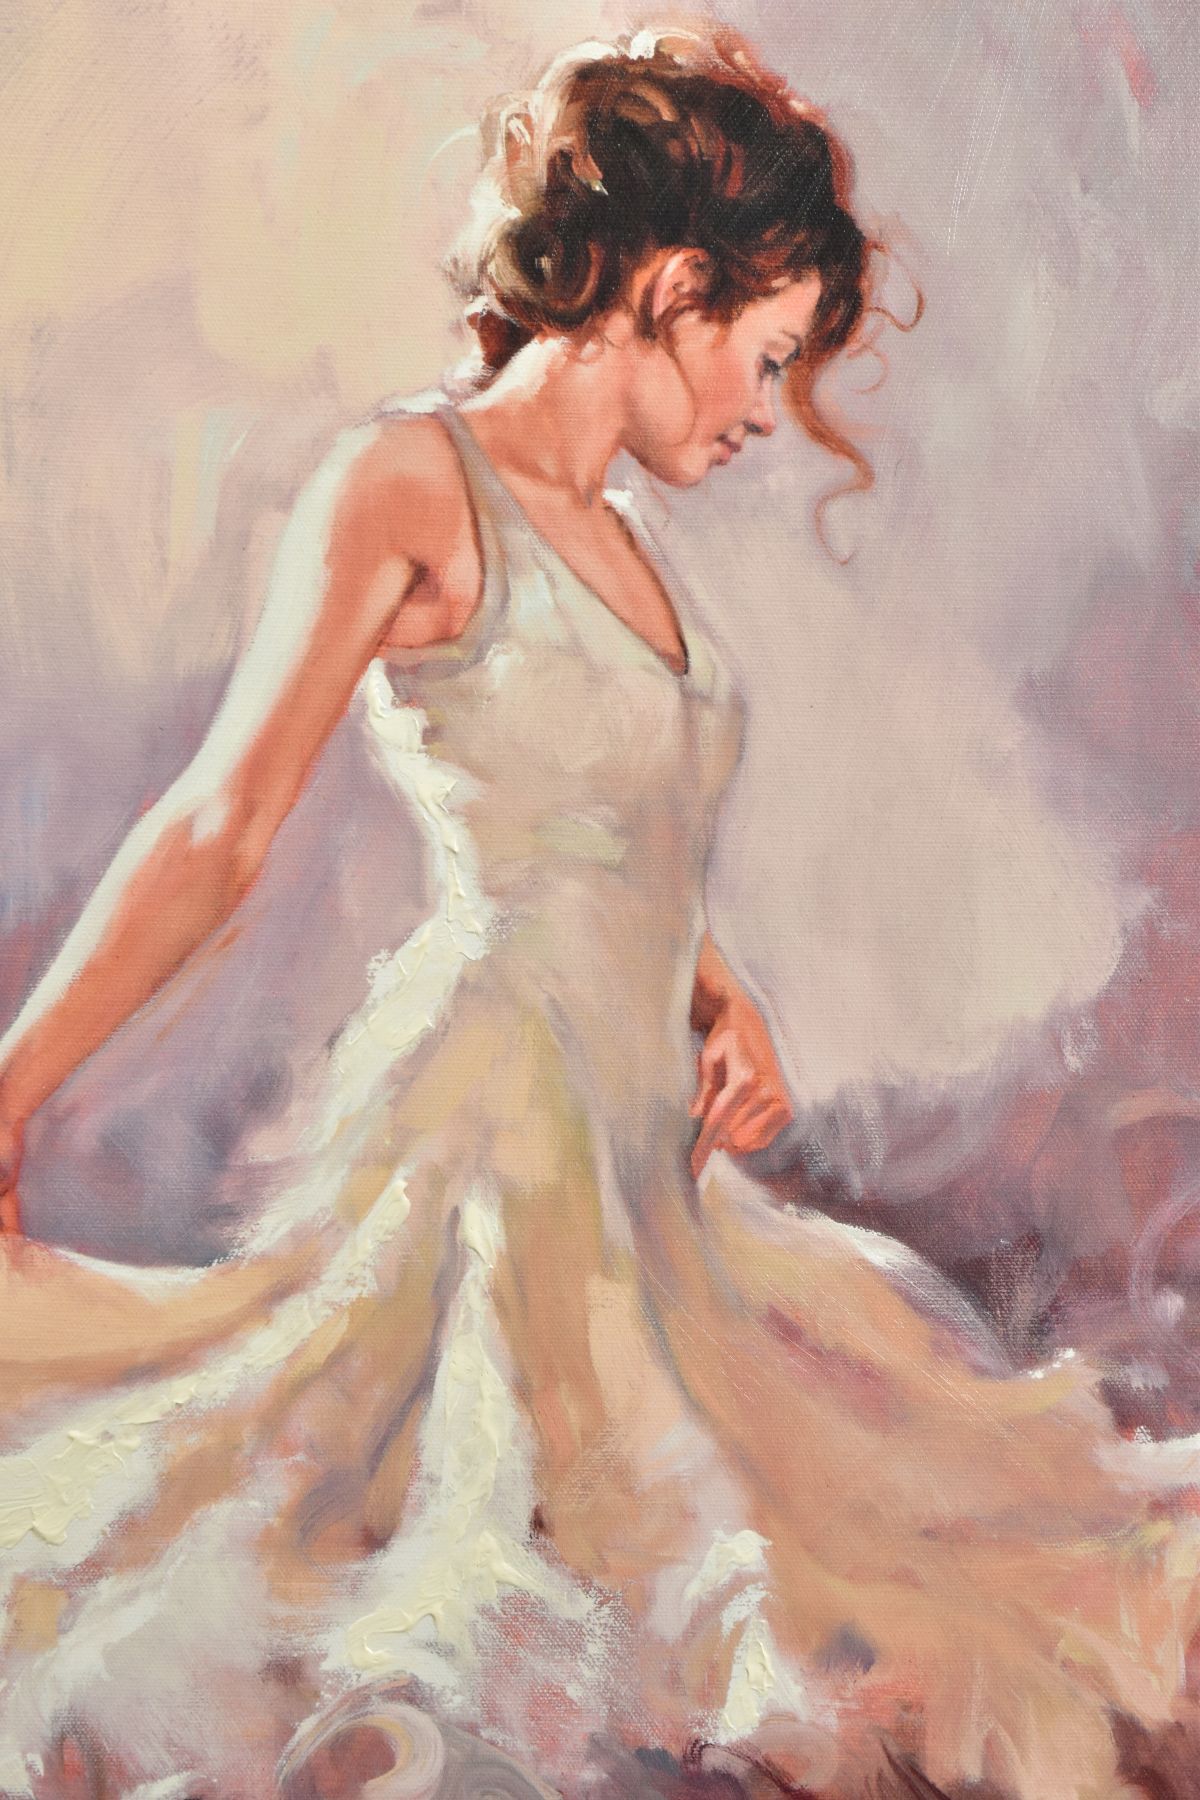 MARK SPAIN (BRITISH CONTEMPORARY) 'FIESTA' a study of a female figure wearing a white dress, limited - Image 3 of 9